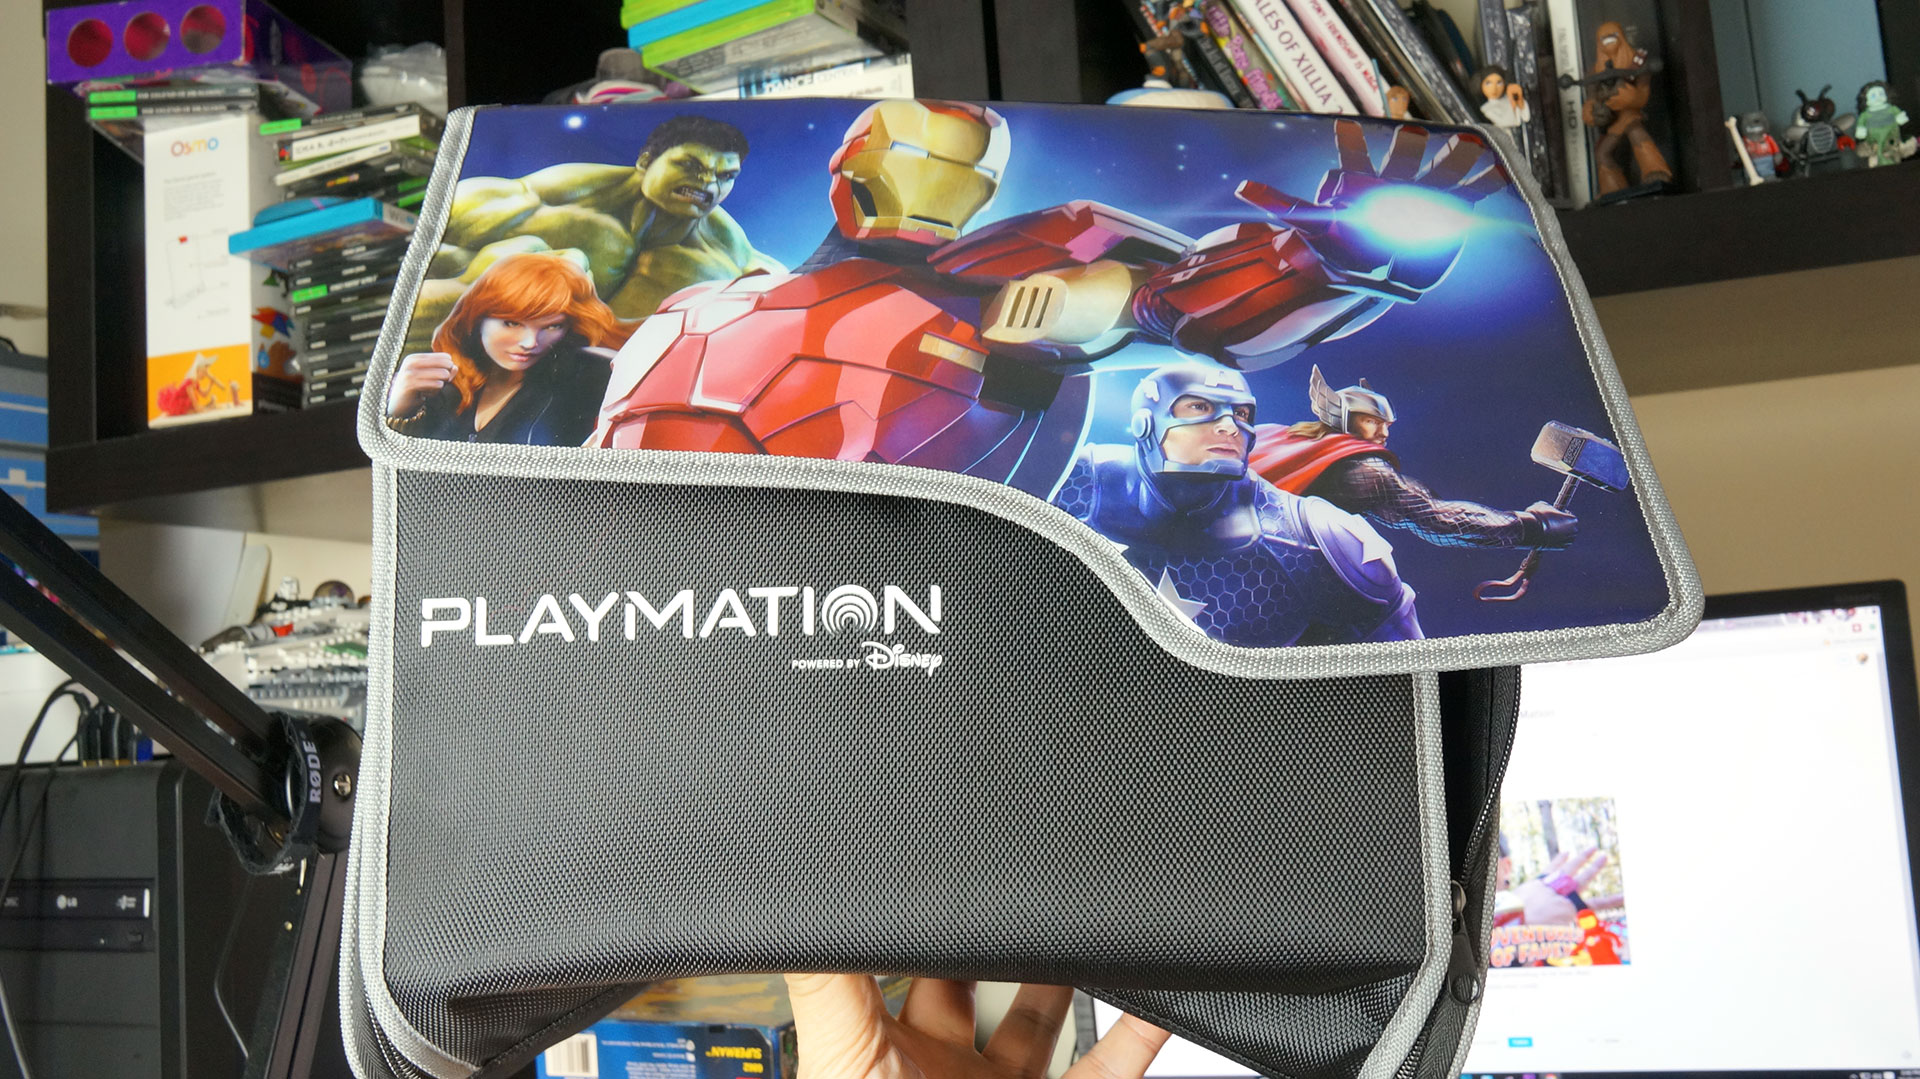 Having Way Too Much Fun With Disney PlayMation